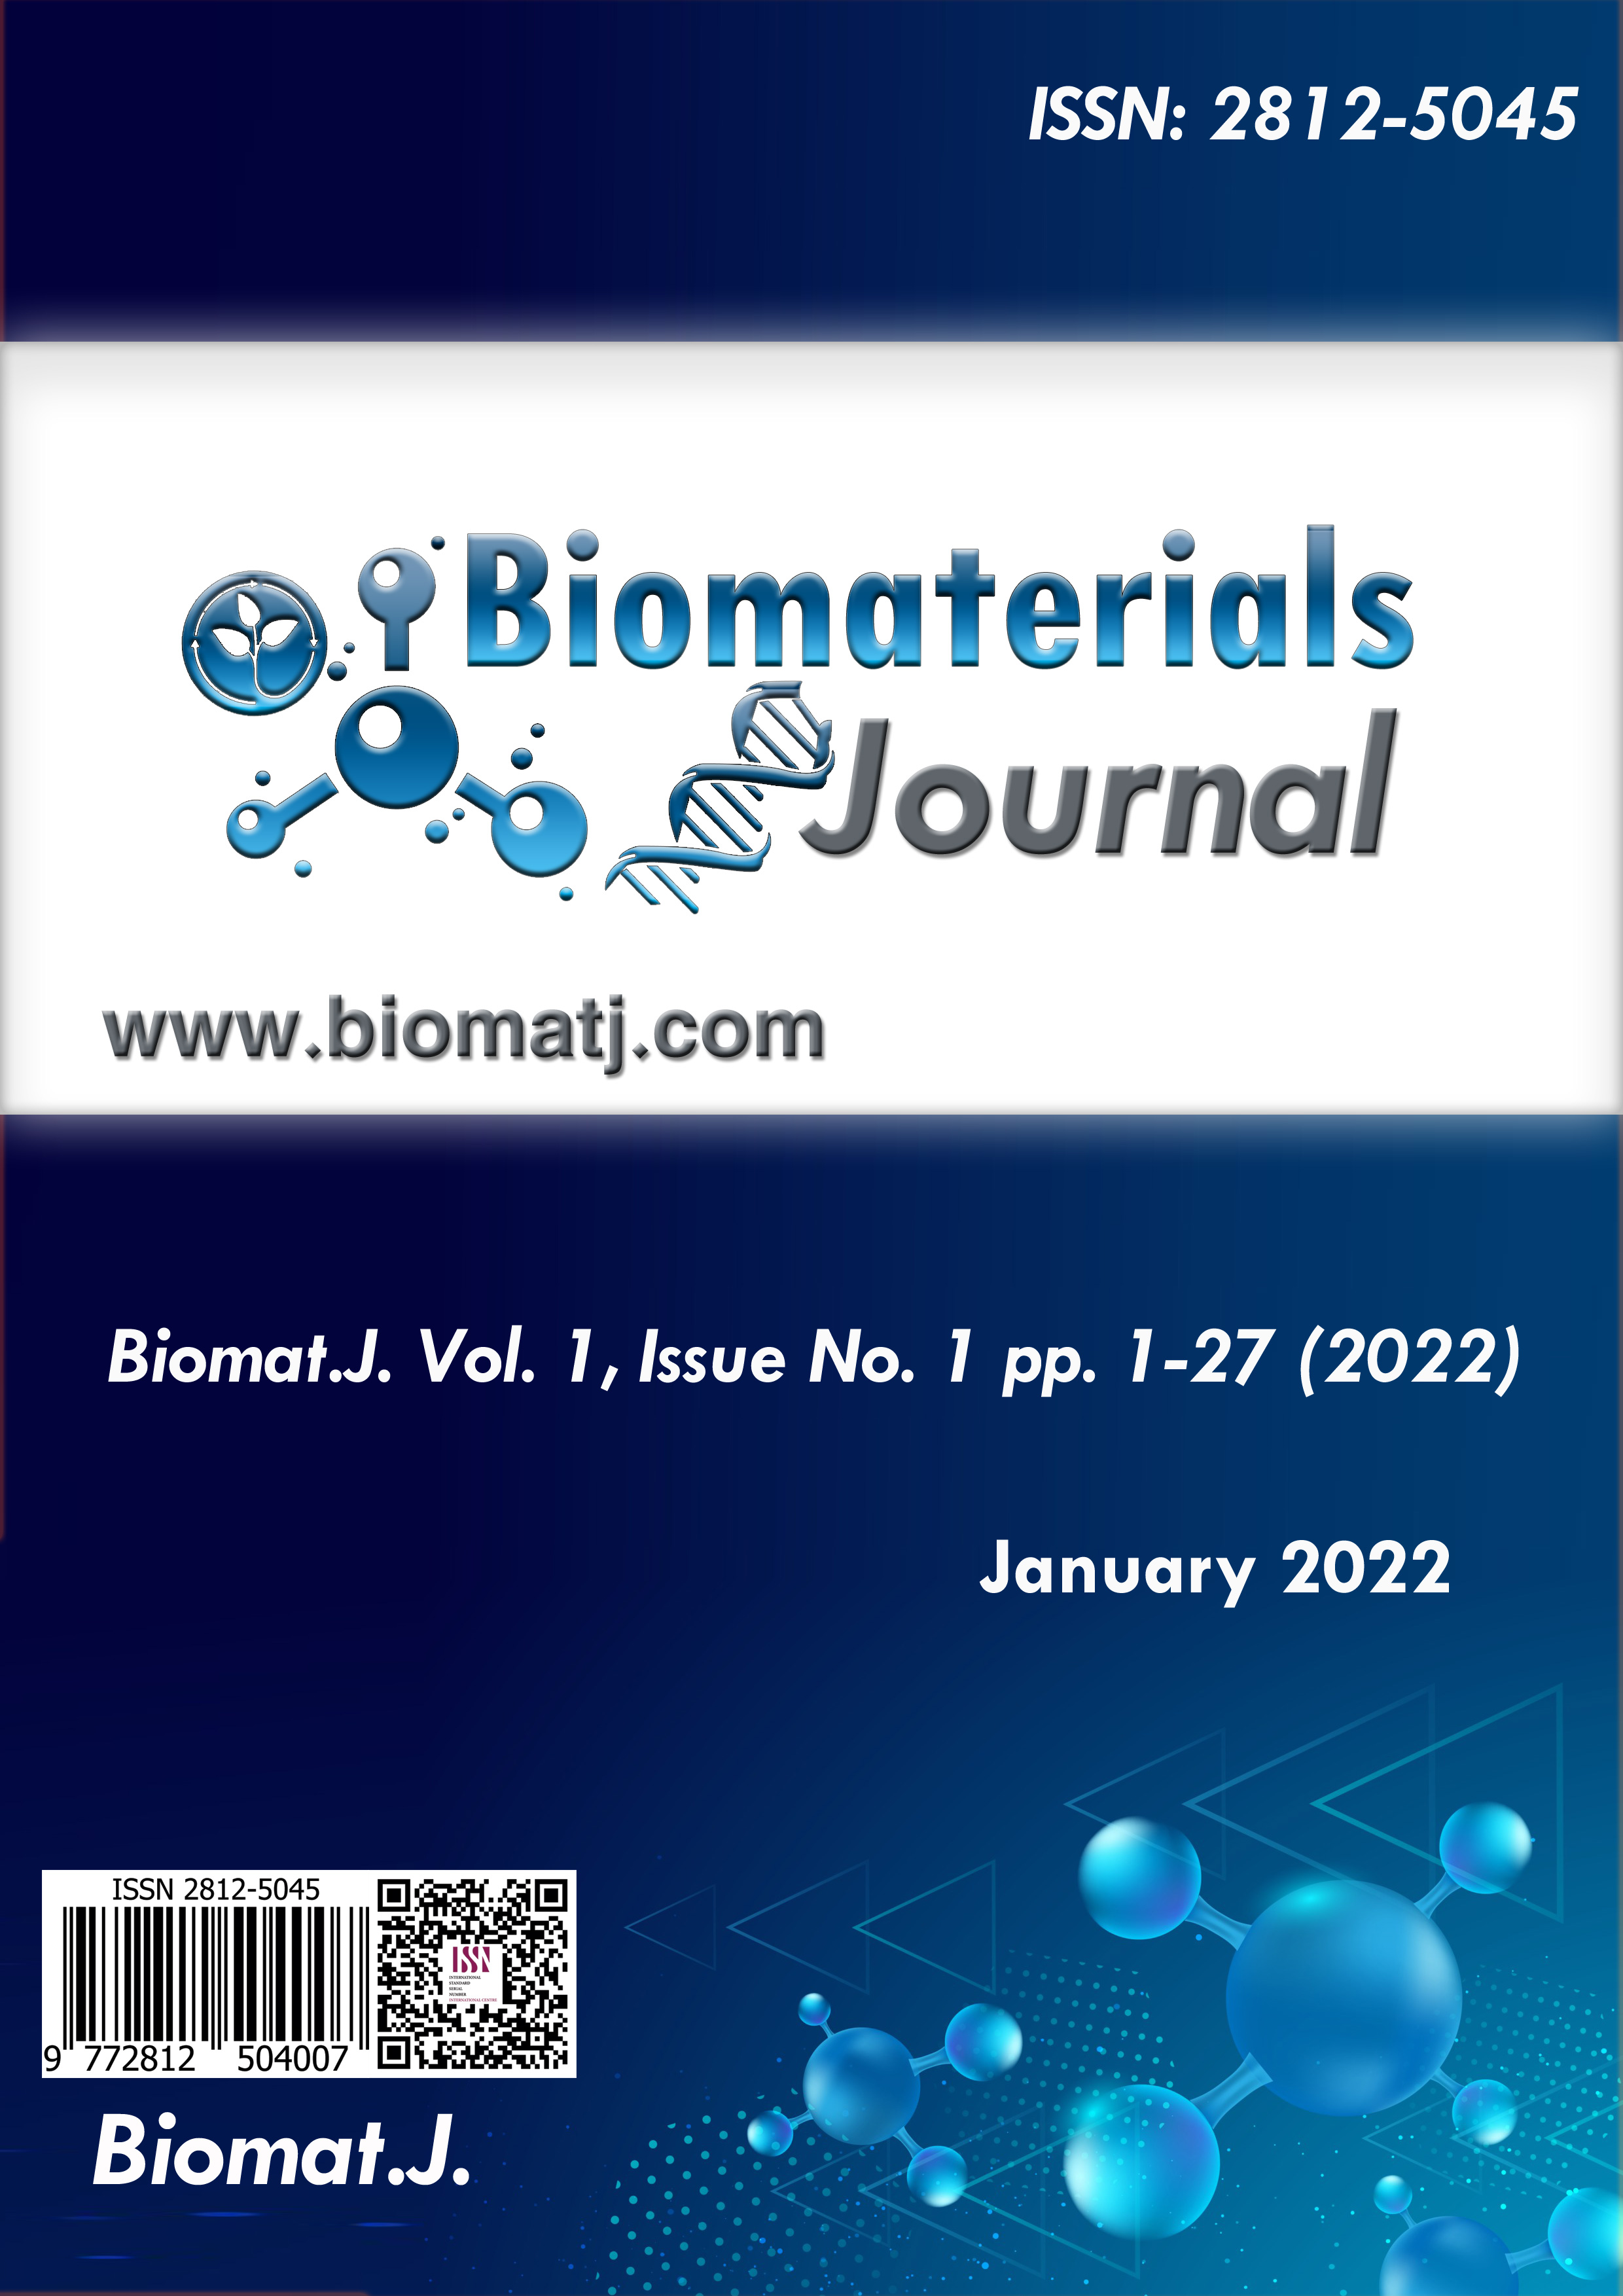 Biomaterials Journal Volume 1, Issue No. 1, January 2022